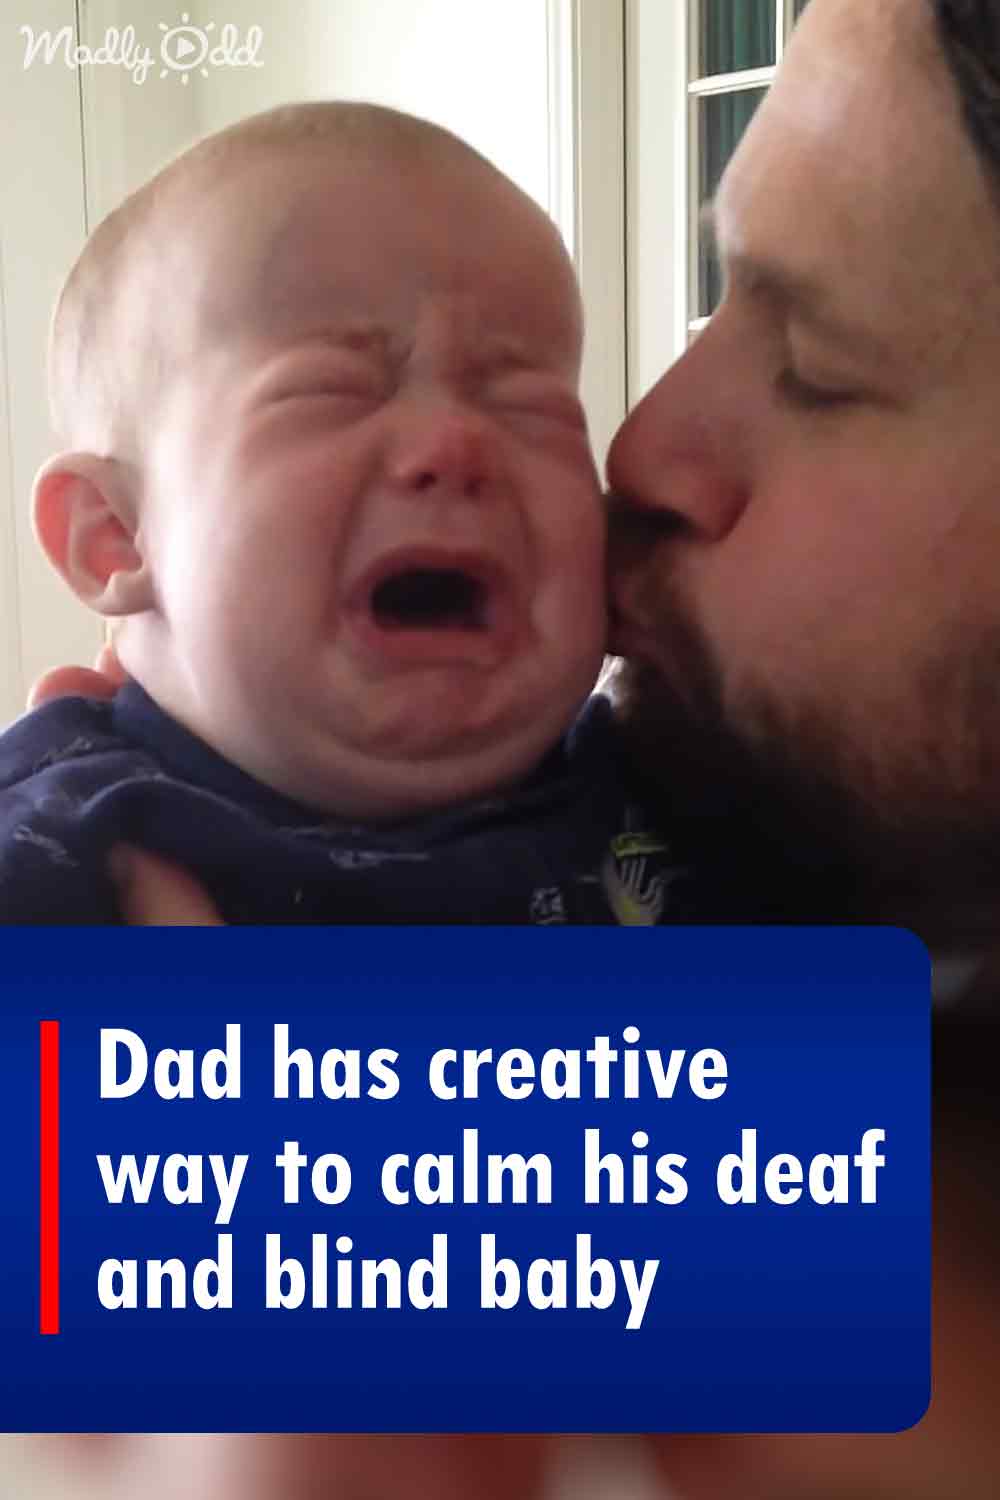 Dad has creative way to calm his deaf and blind baby